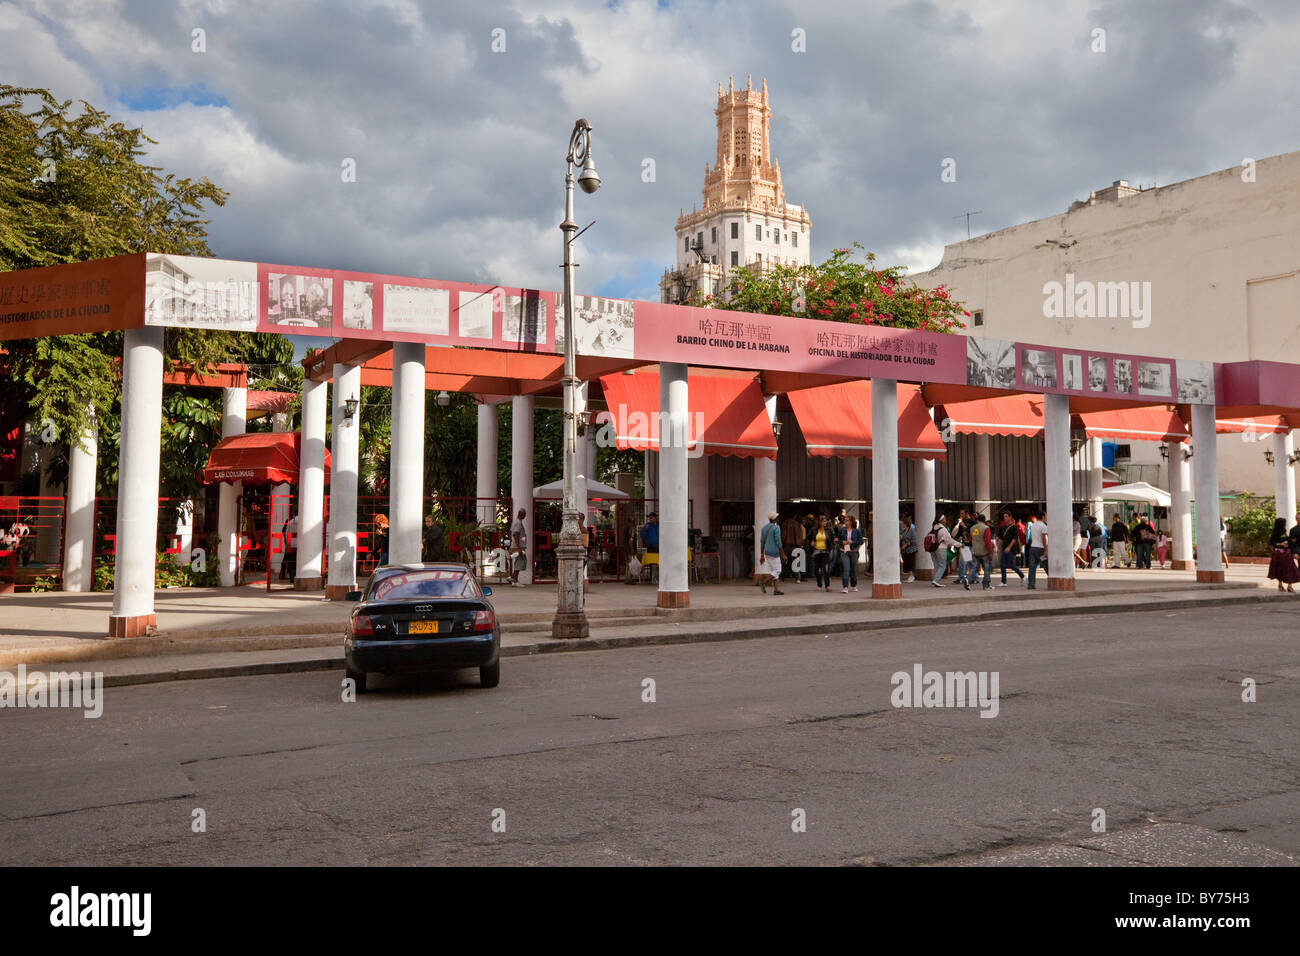 Cuba, Havana. Entrance to Shopping Arcade in Havana's Chinatown District. Cuban Telecom Building in Center Background. Stock Photo